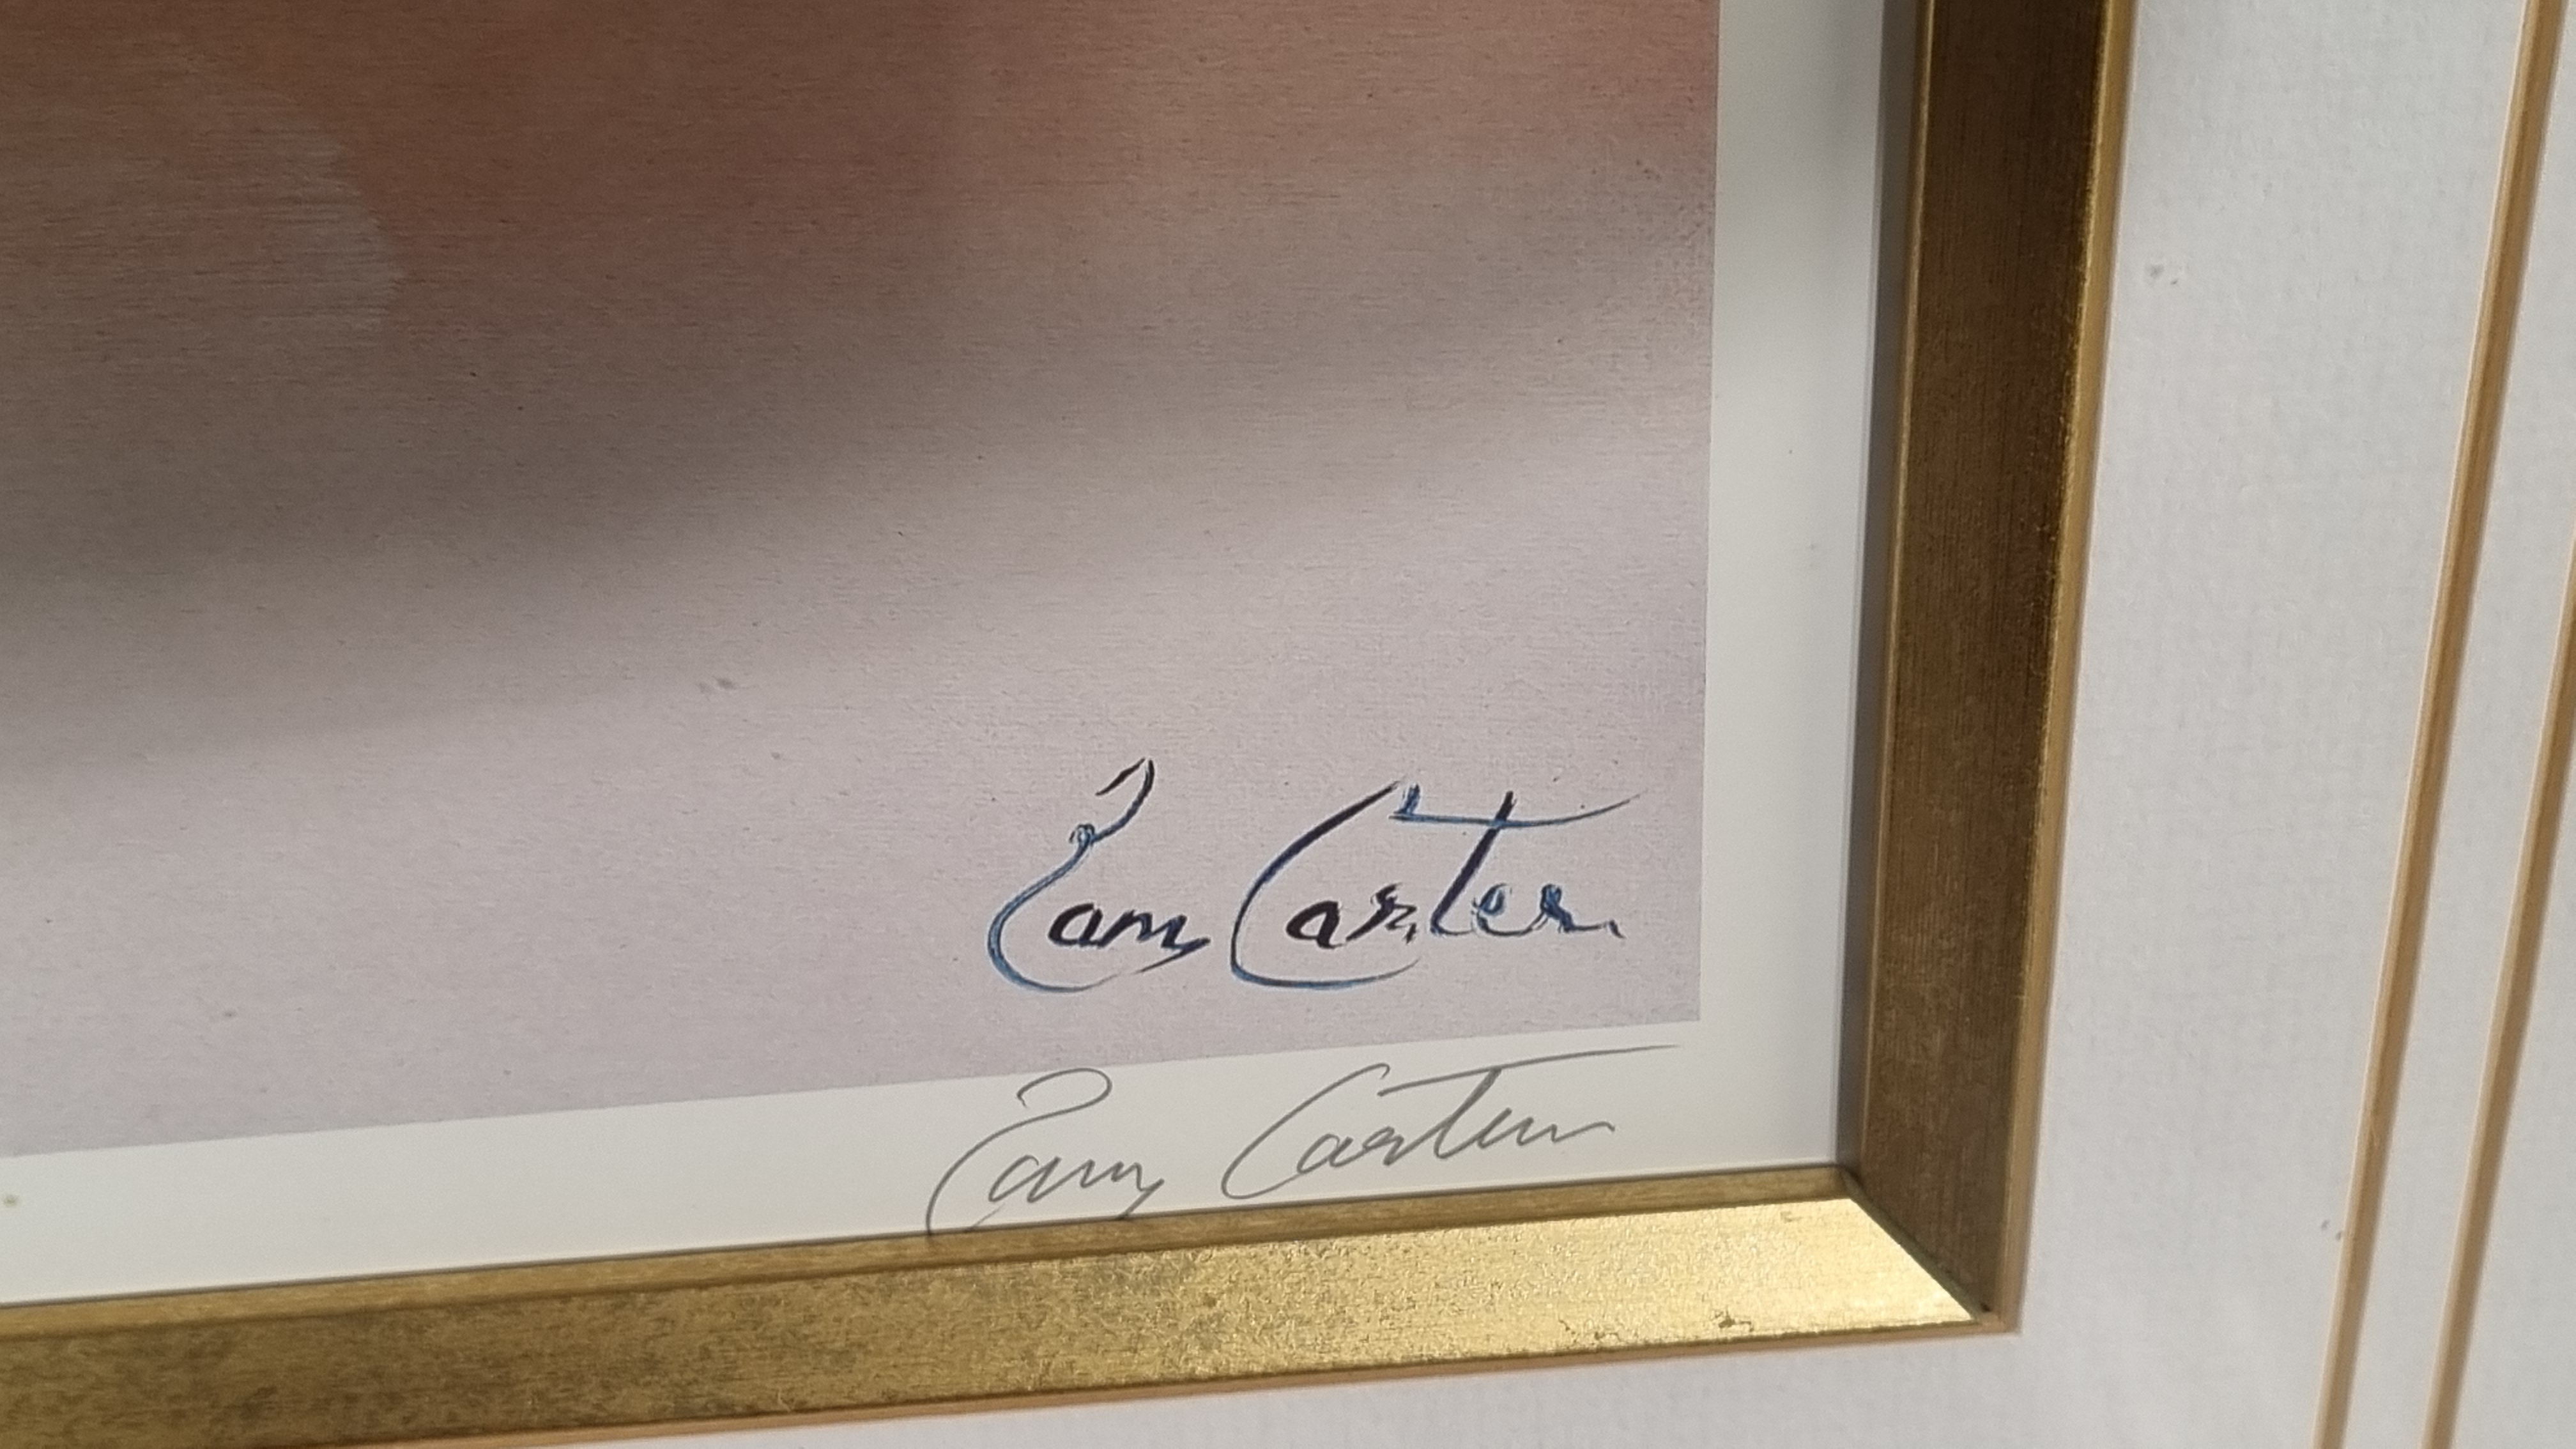 Pam Carter DA PAI, Signed Limited Edition - Image 2 of 5